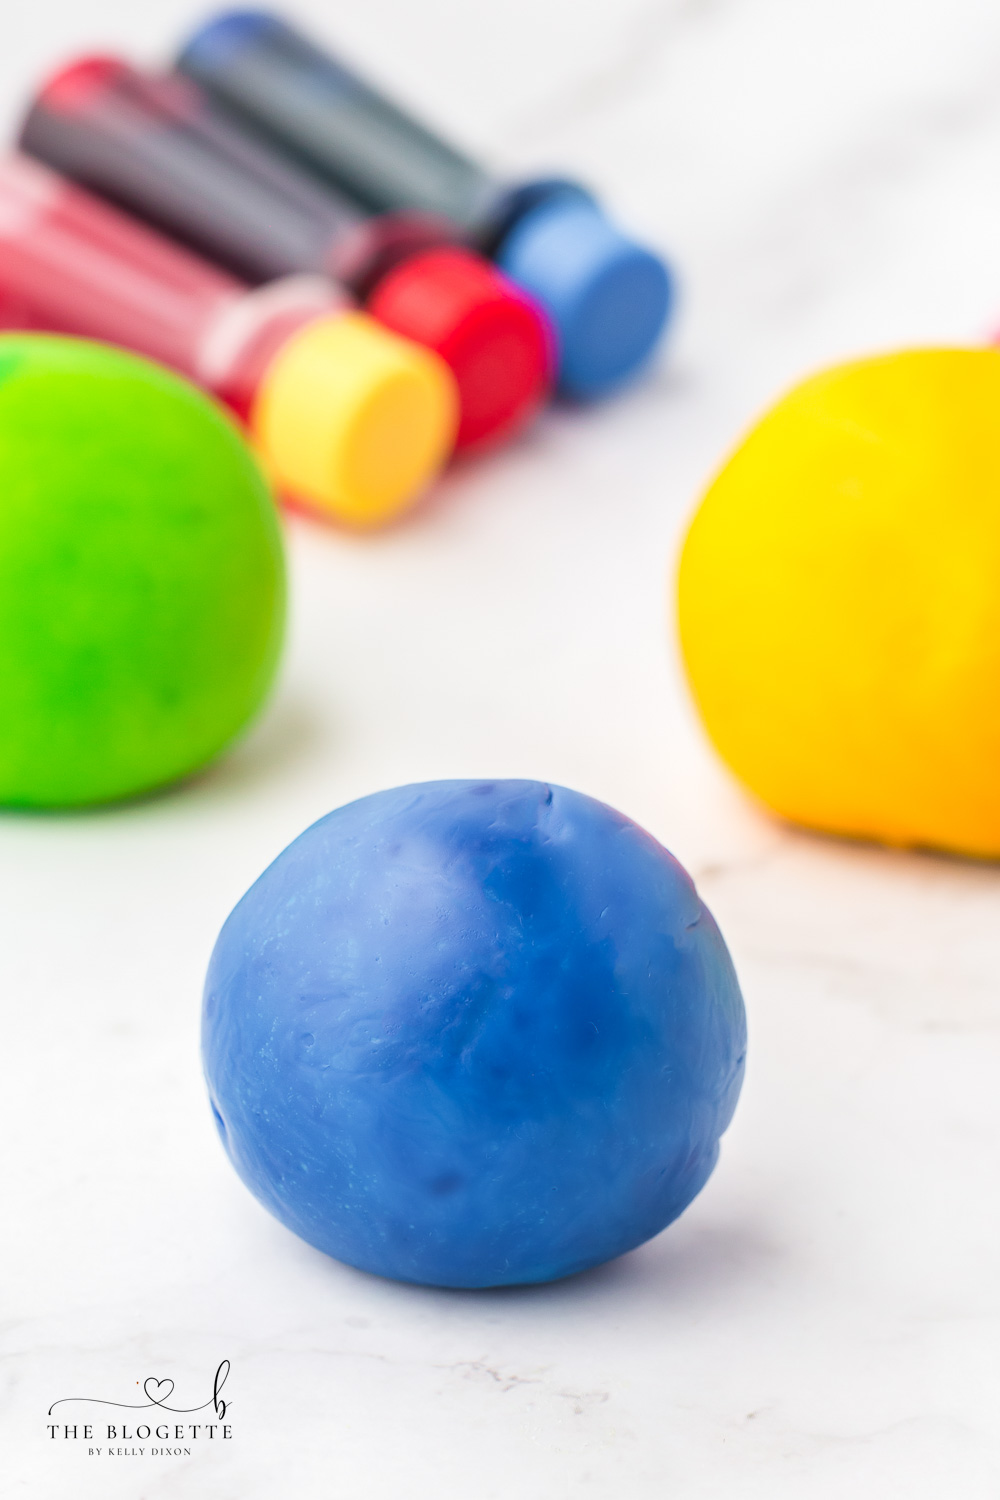 Homemade Bouncy Balls are a great boredom buster and craft for kids! These DIY bouncy balls can also serve as a simple science experiment too!